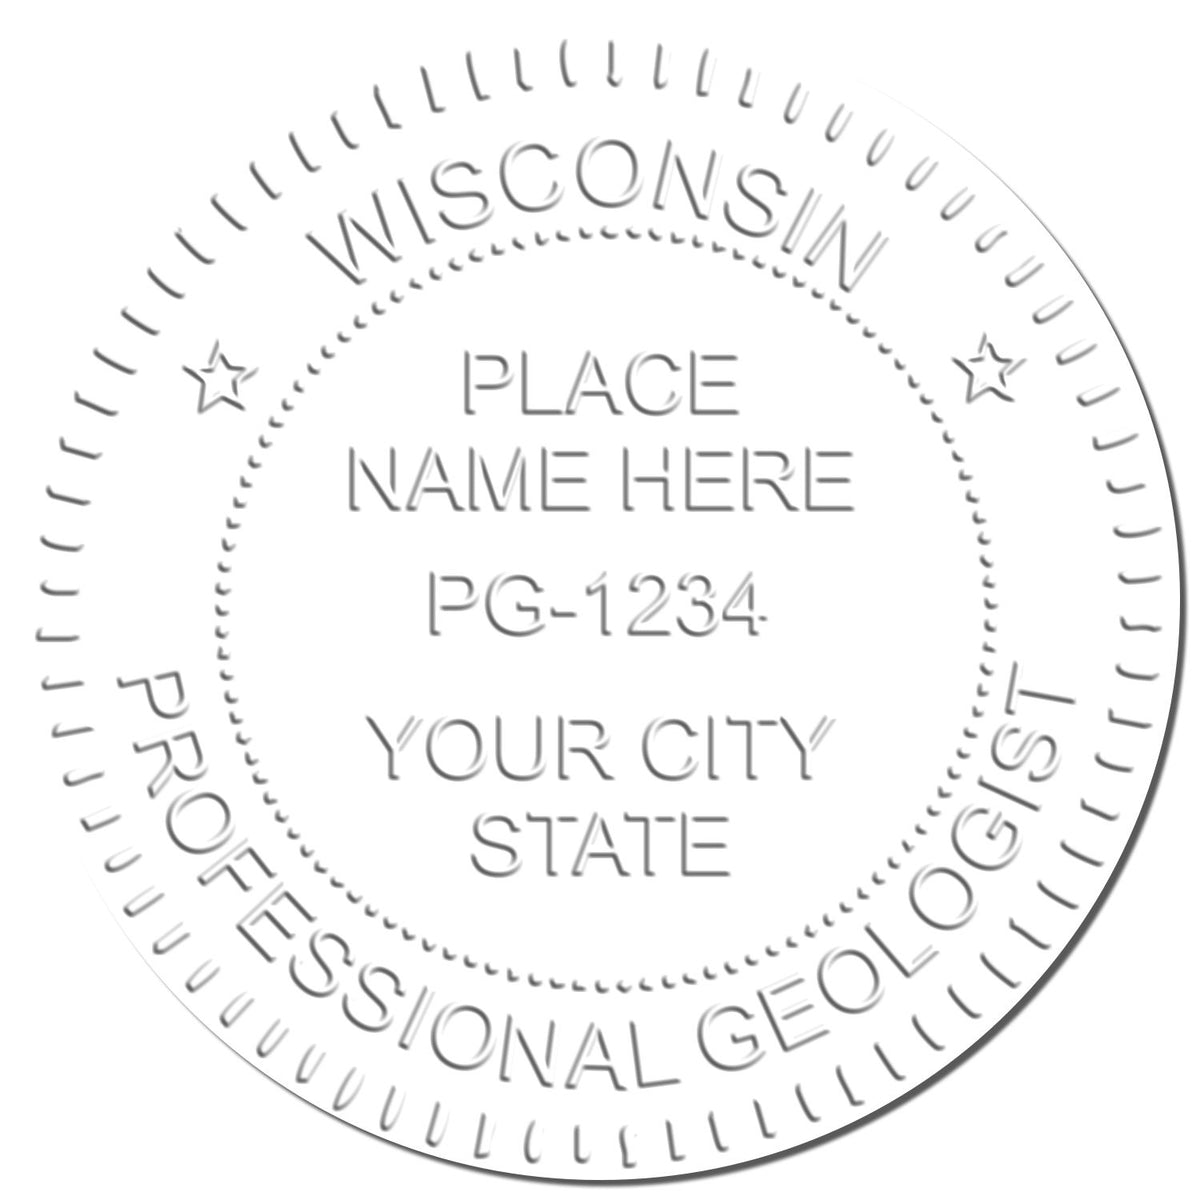 A photograph of the Hybrid Wisconsin Geologist Seal stamp impression reveals a vivid, professional image of the on paper.